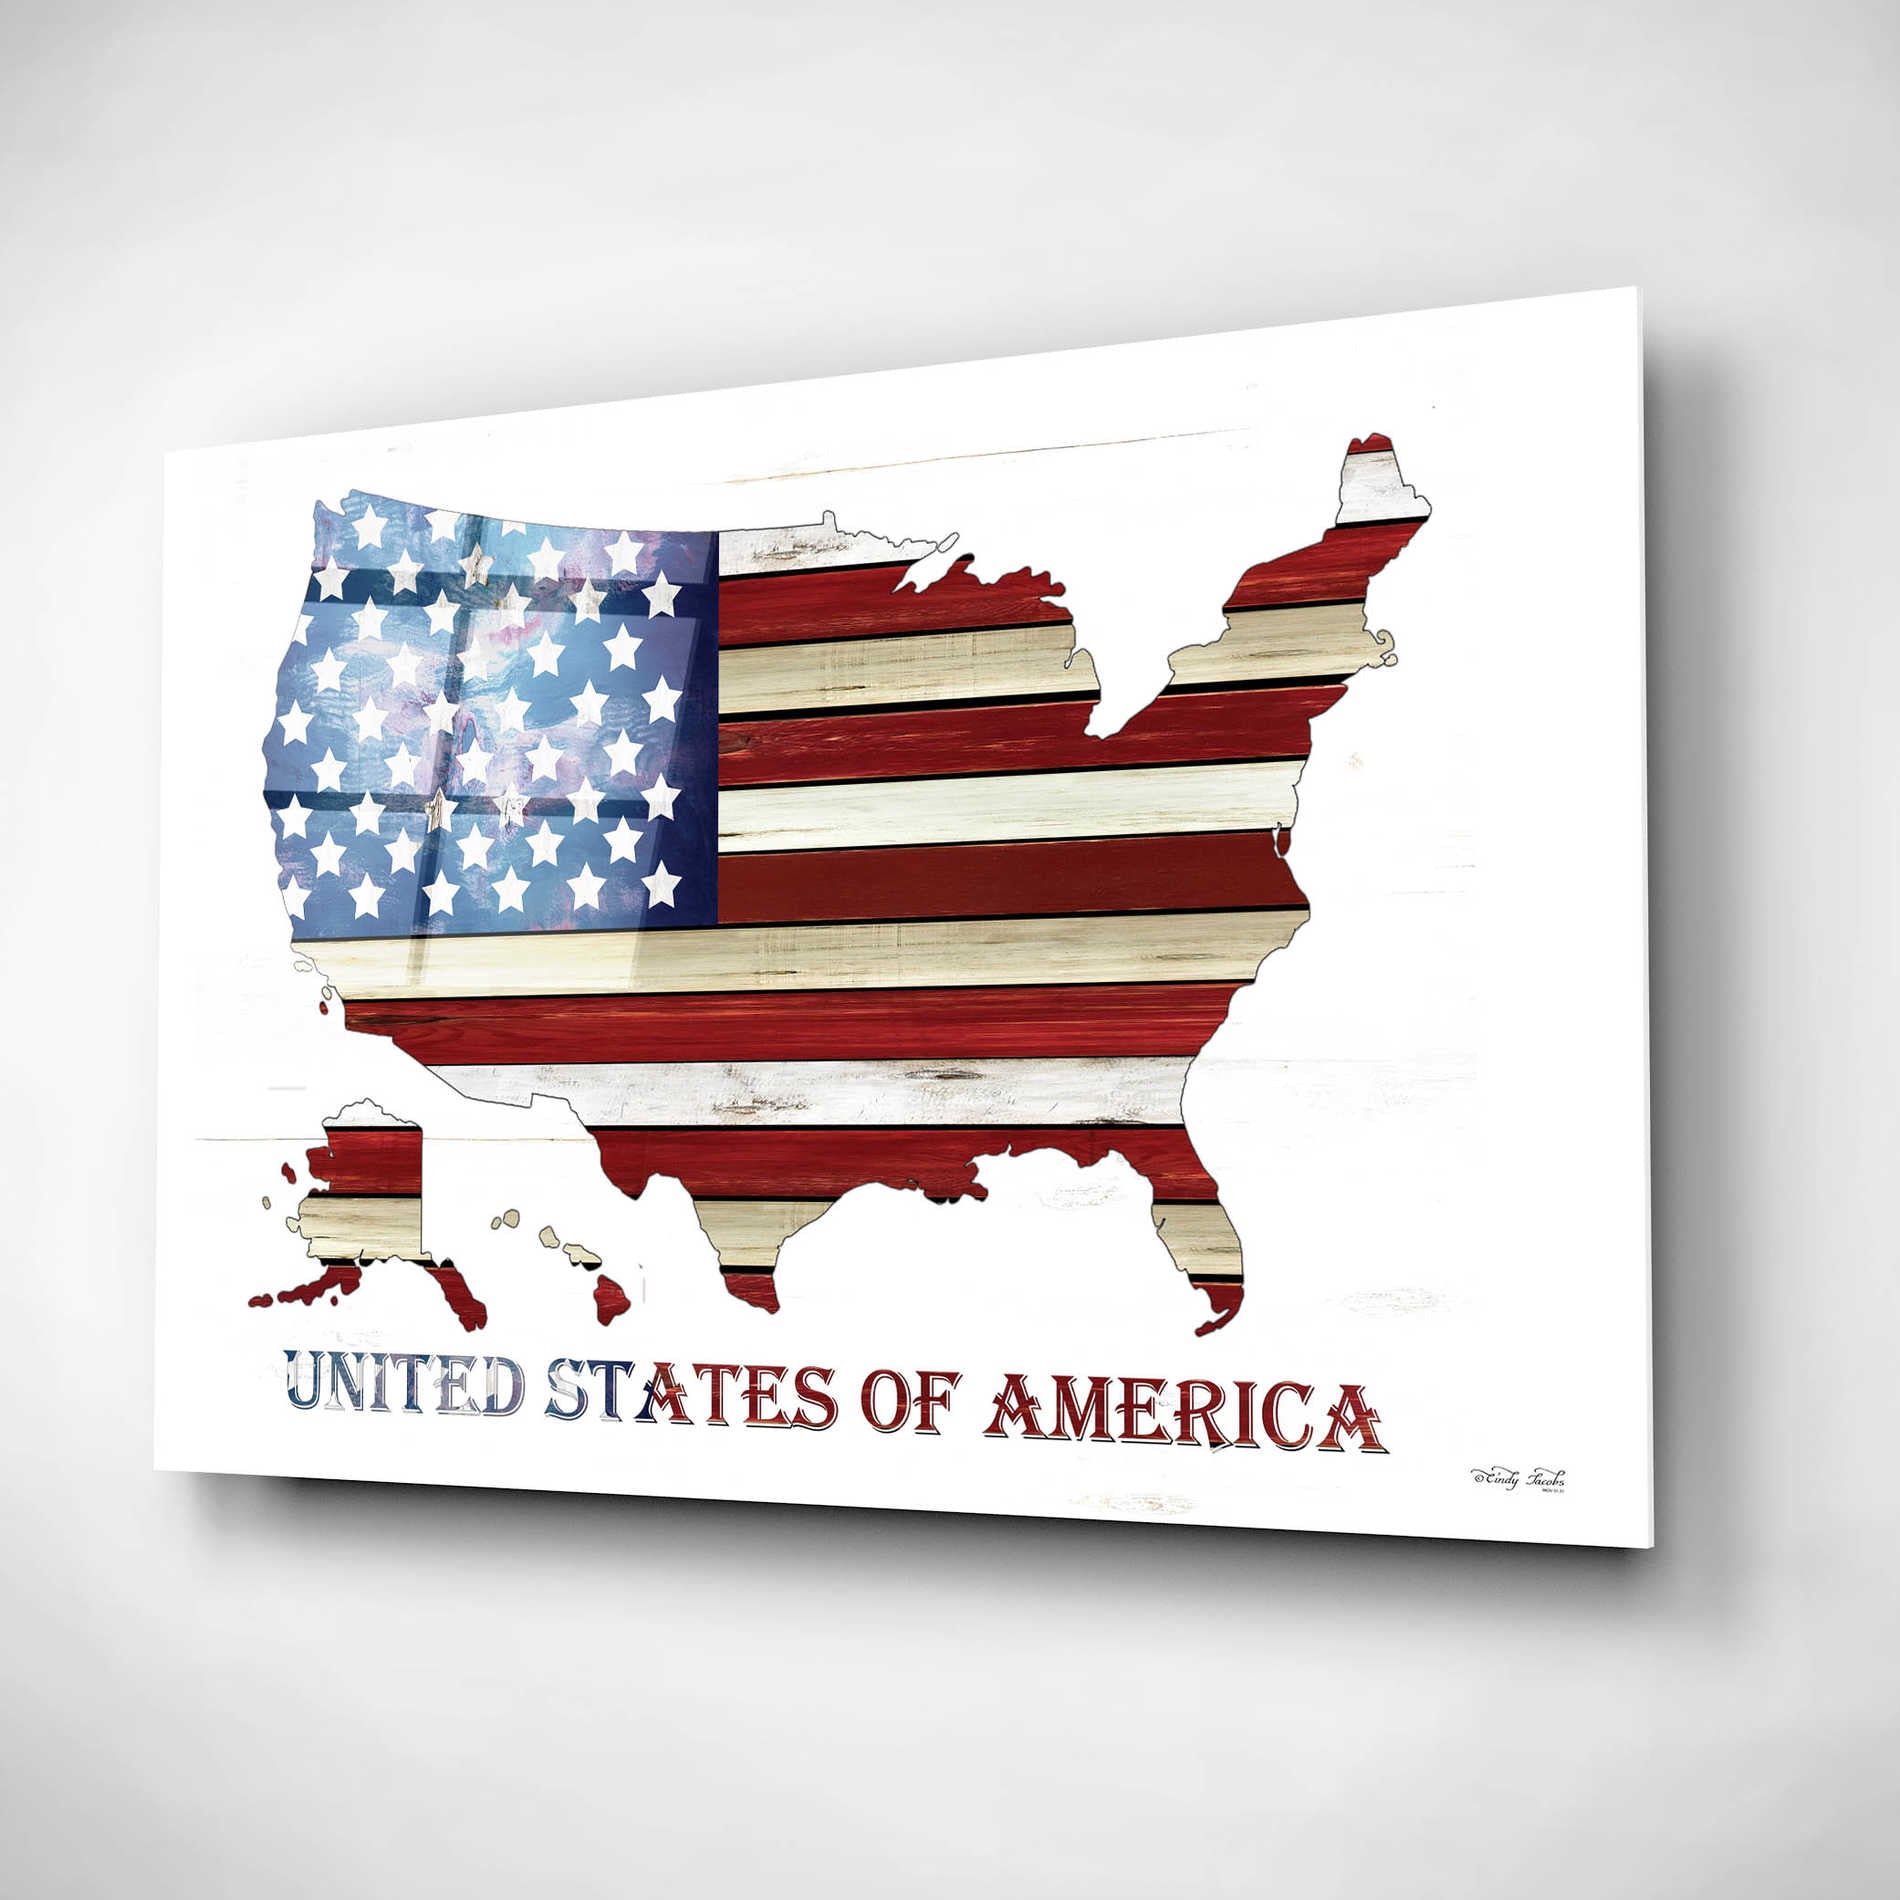 Epic Art 'United States of America' by Cindy Jacobs, Acrylic Glass Wall Art,16x12